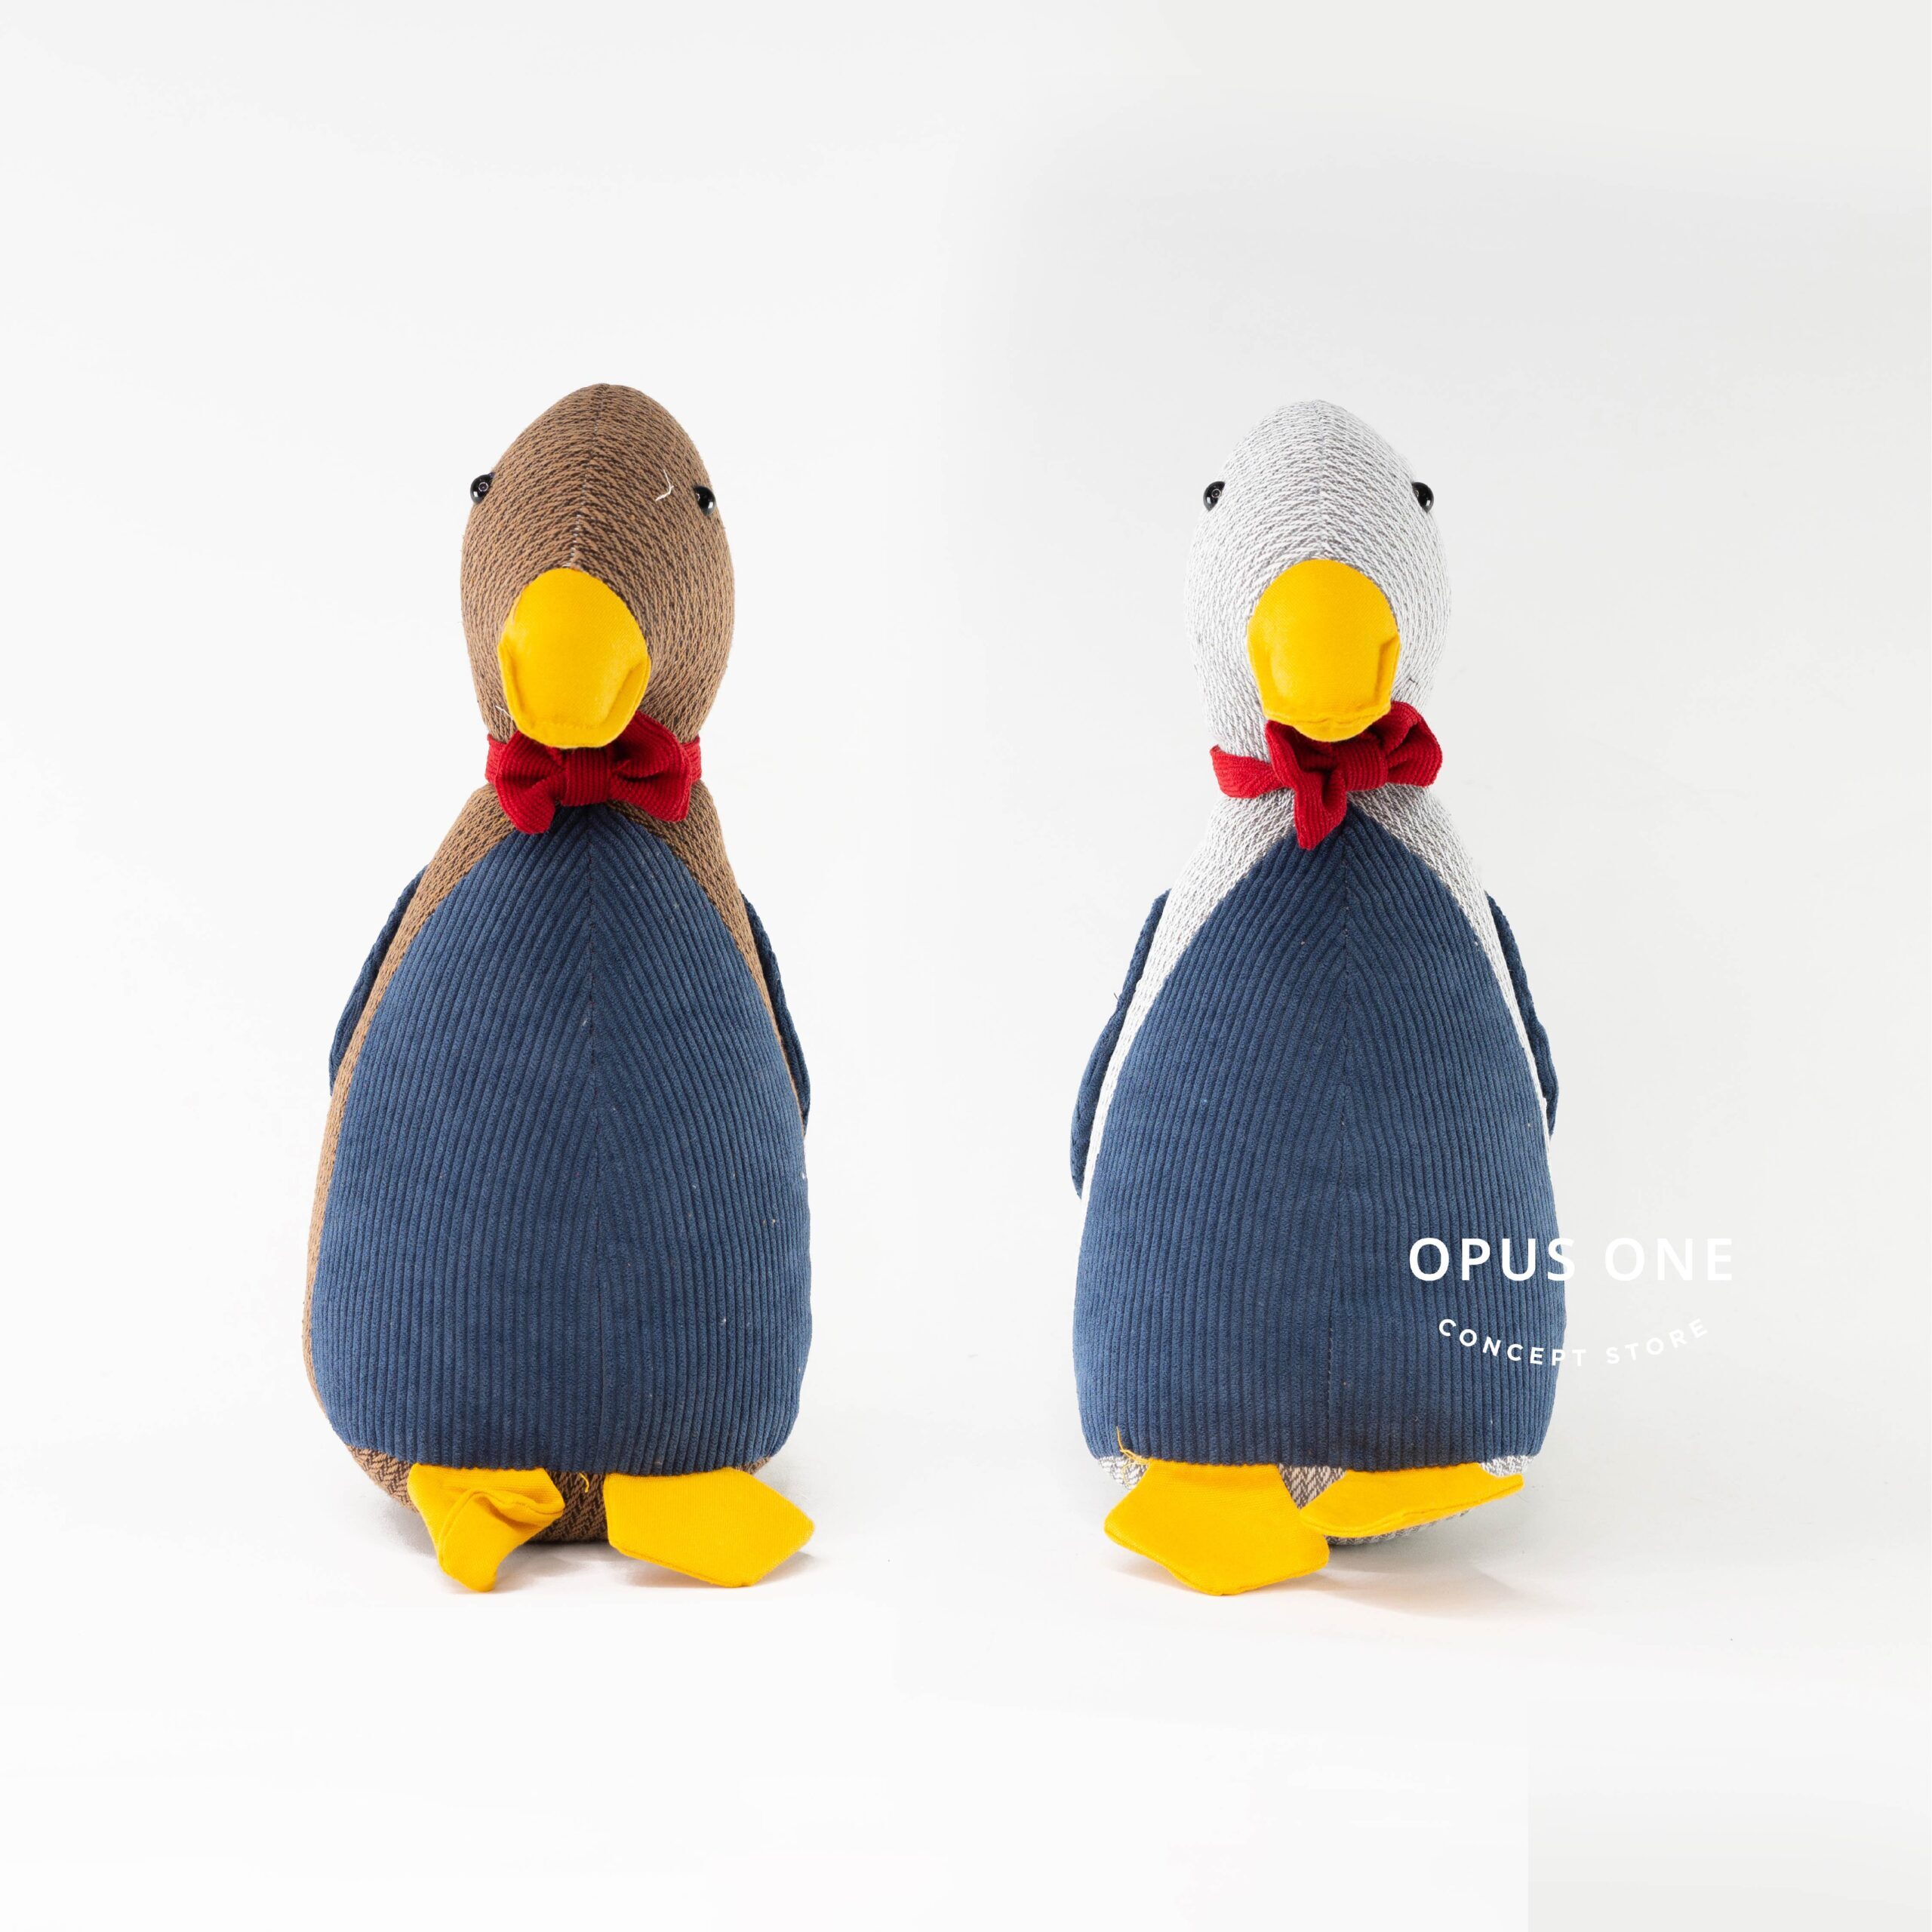 Opus One Red Tie Penguin Large 15006